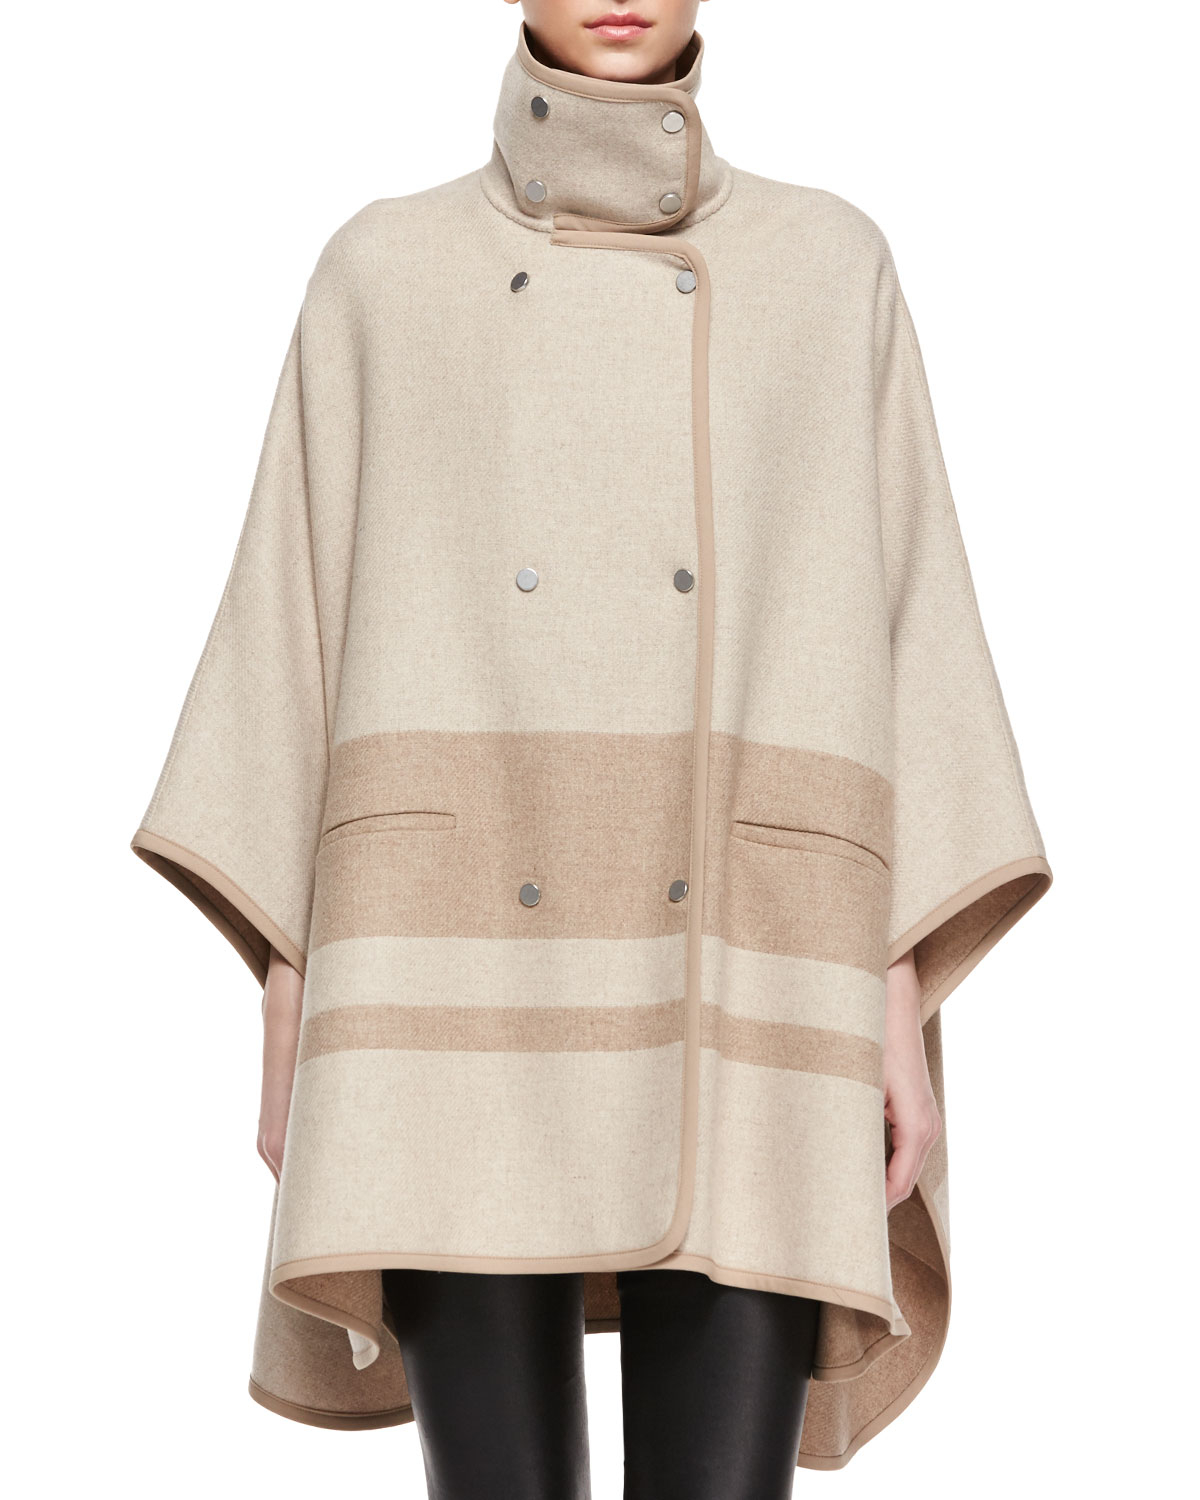 Lyst - Vince High-Collar Blanket Stripe Cape in Natural